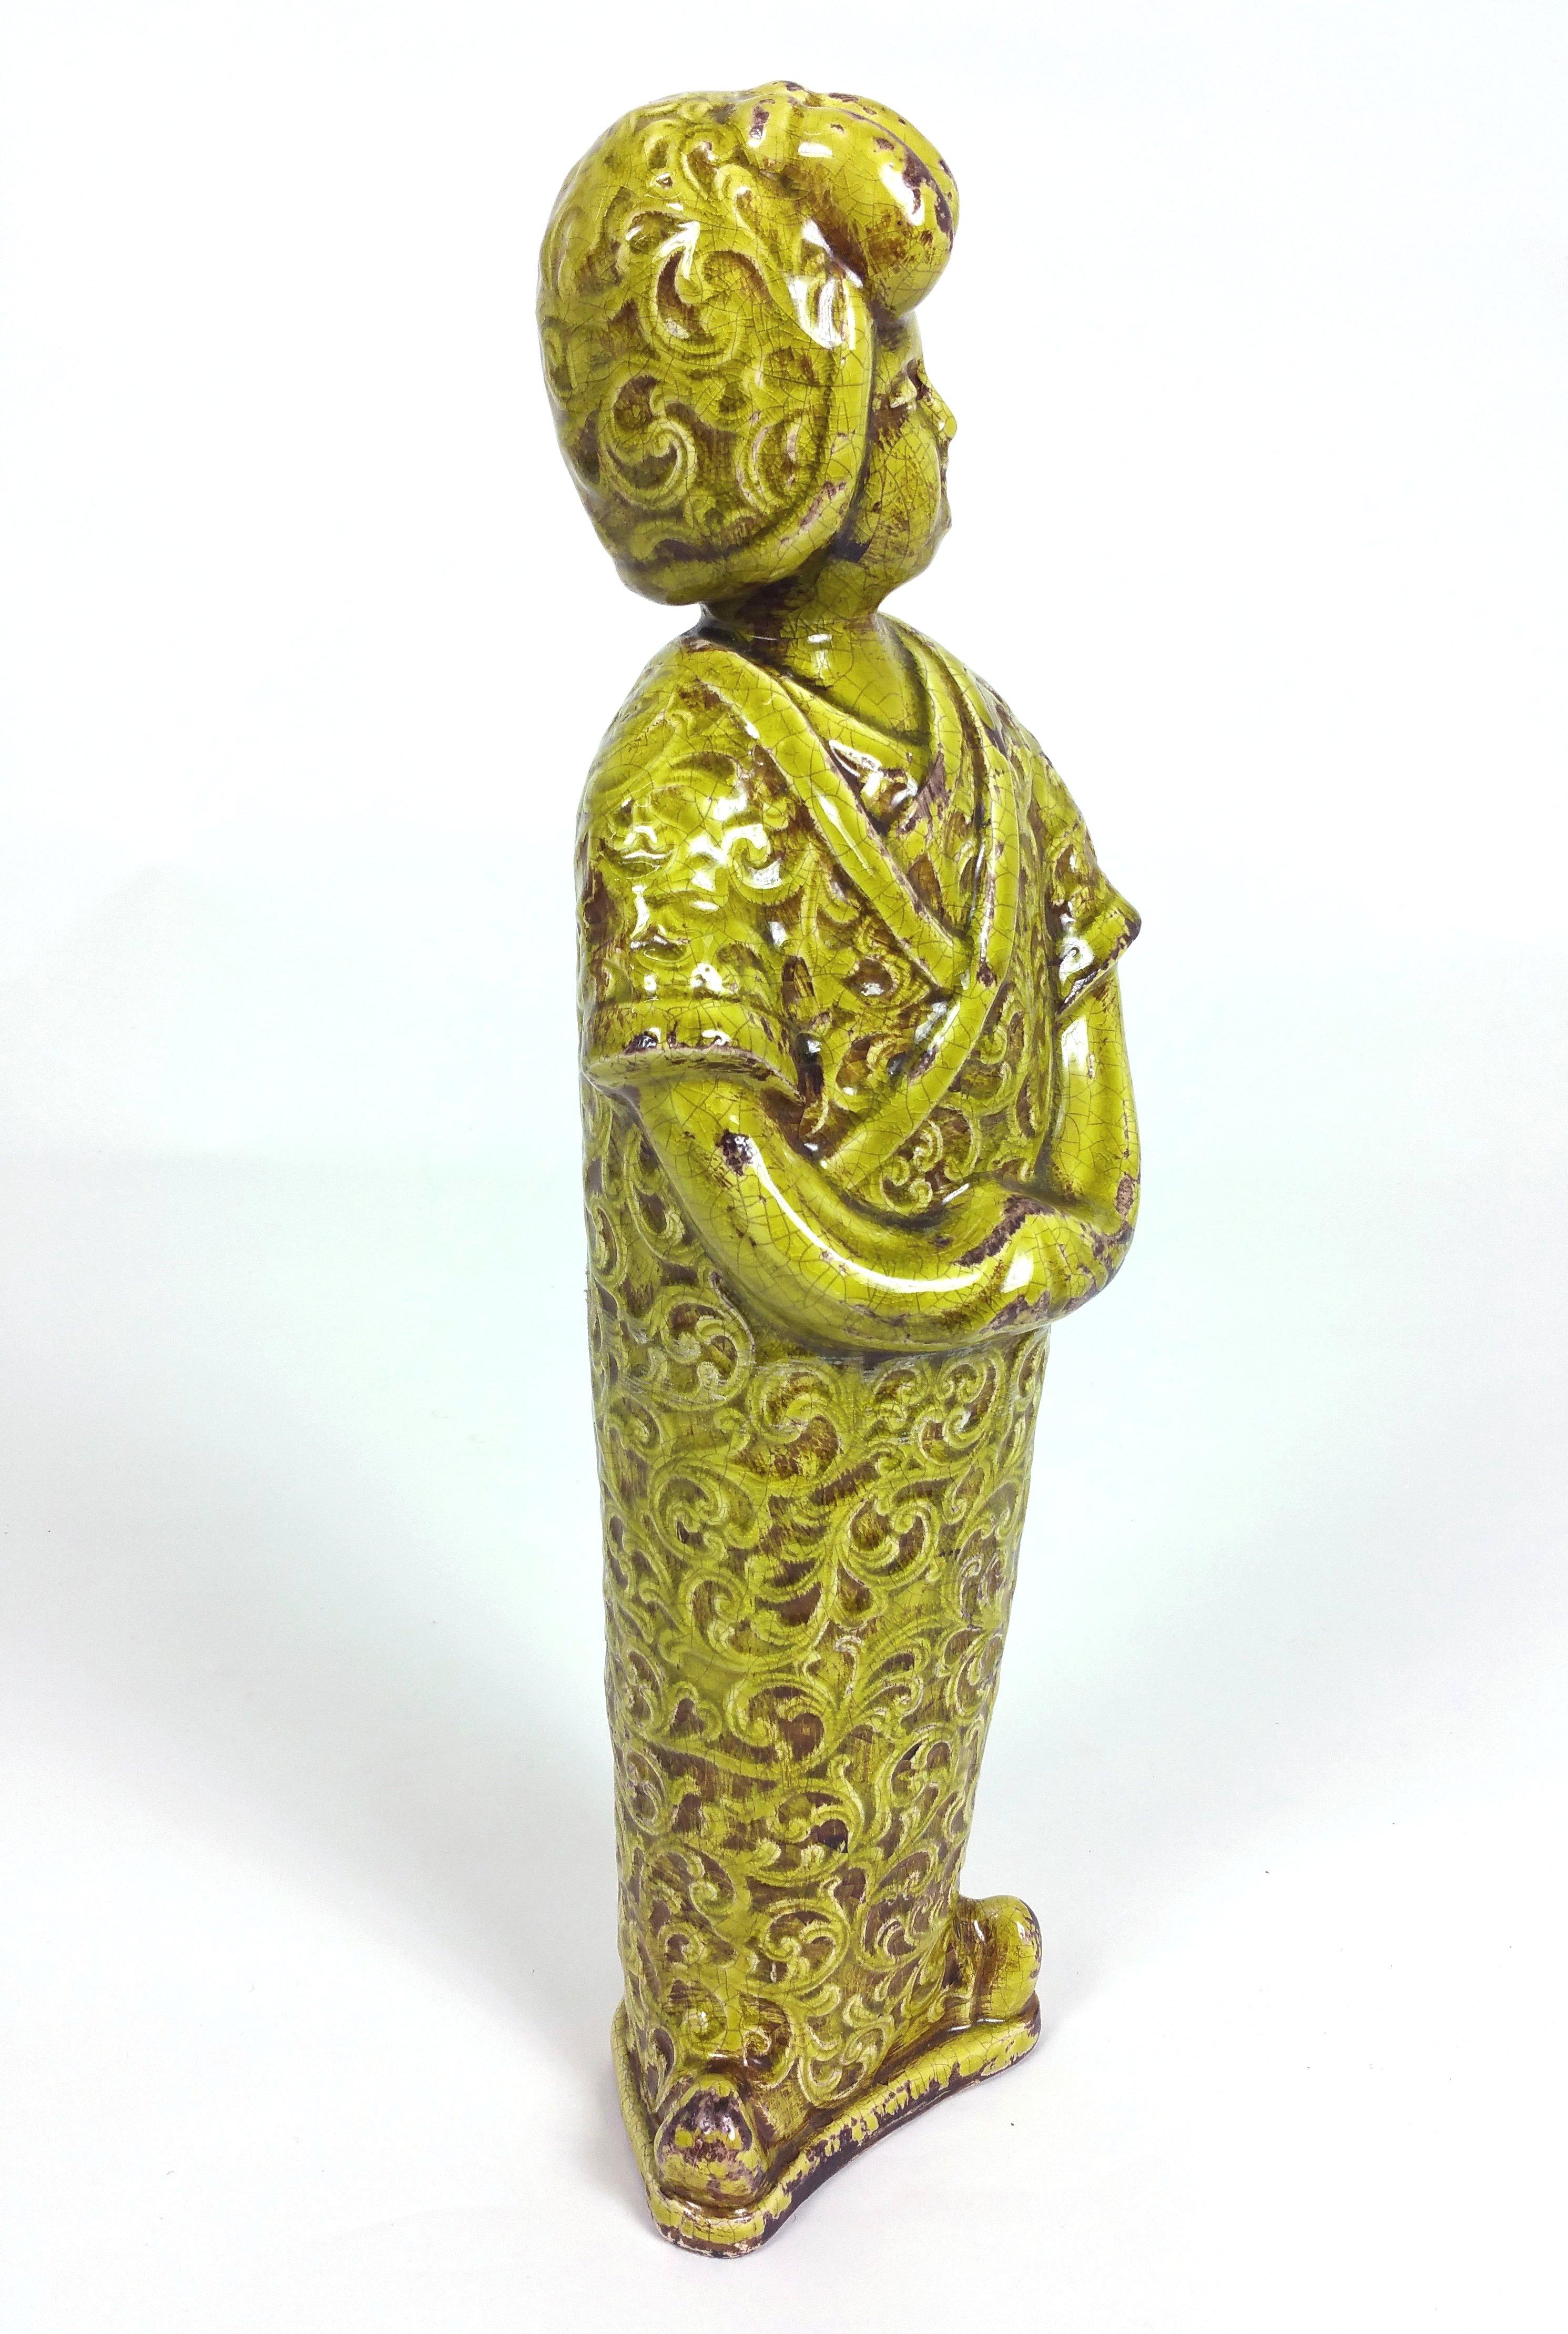 This 19th century French large pottery figure of a geisha in the Japanese style, finished in an apple green glaze, which now has a crackled overall finish. It measures 7 in – 17.8 cm wide, 3 ½ in – 9 cm deep and 20 ½ in – 52 cm in height.